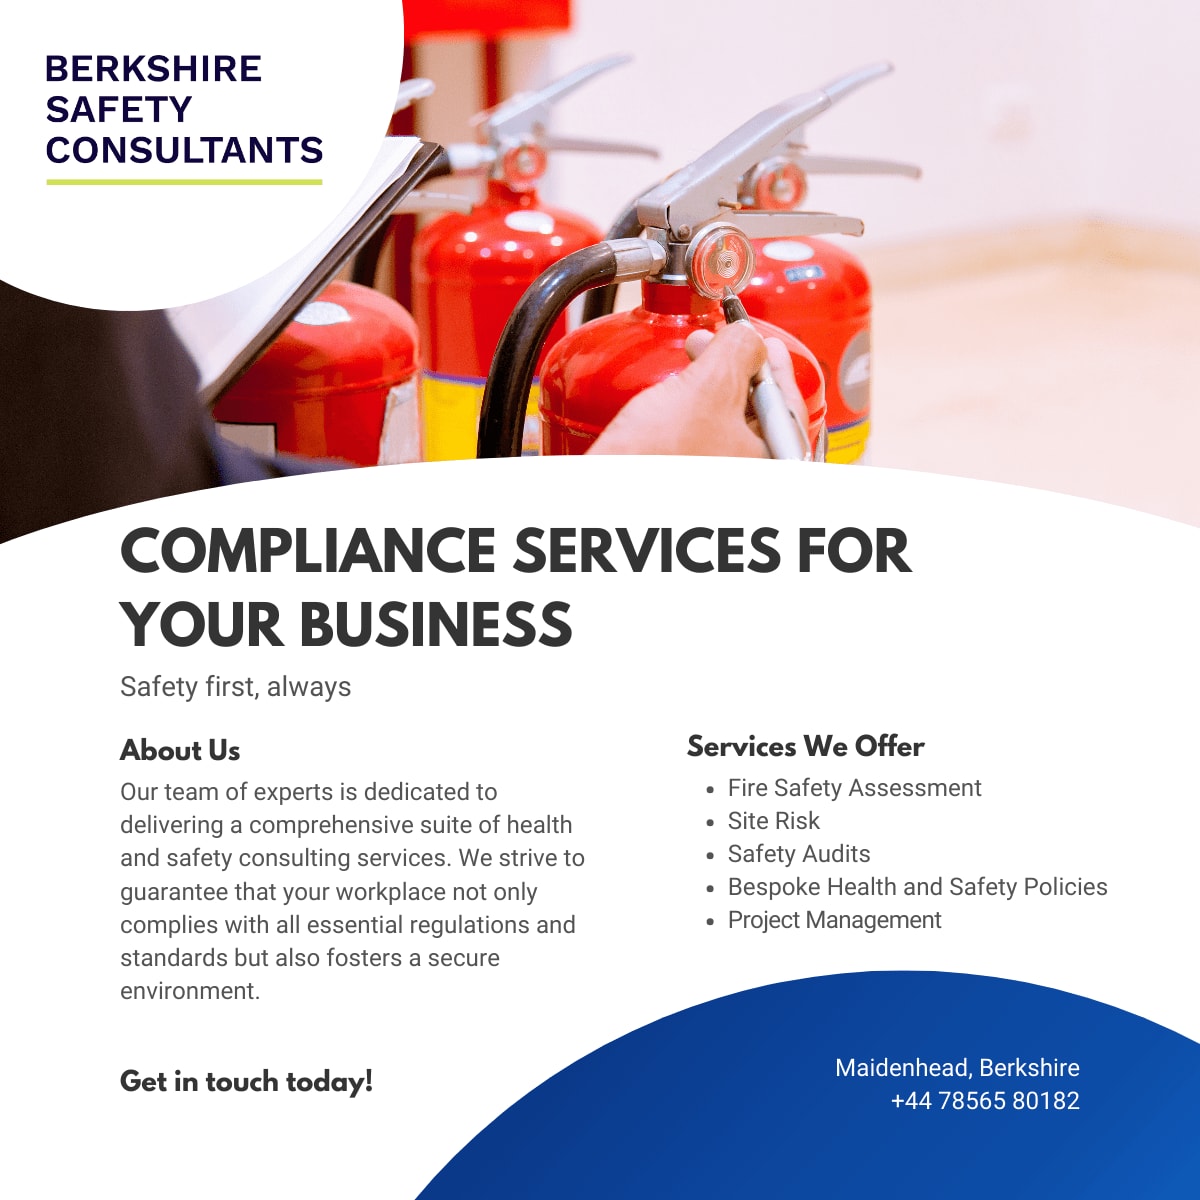 Berkshire Safety Consultants London 07856 580182